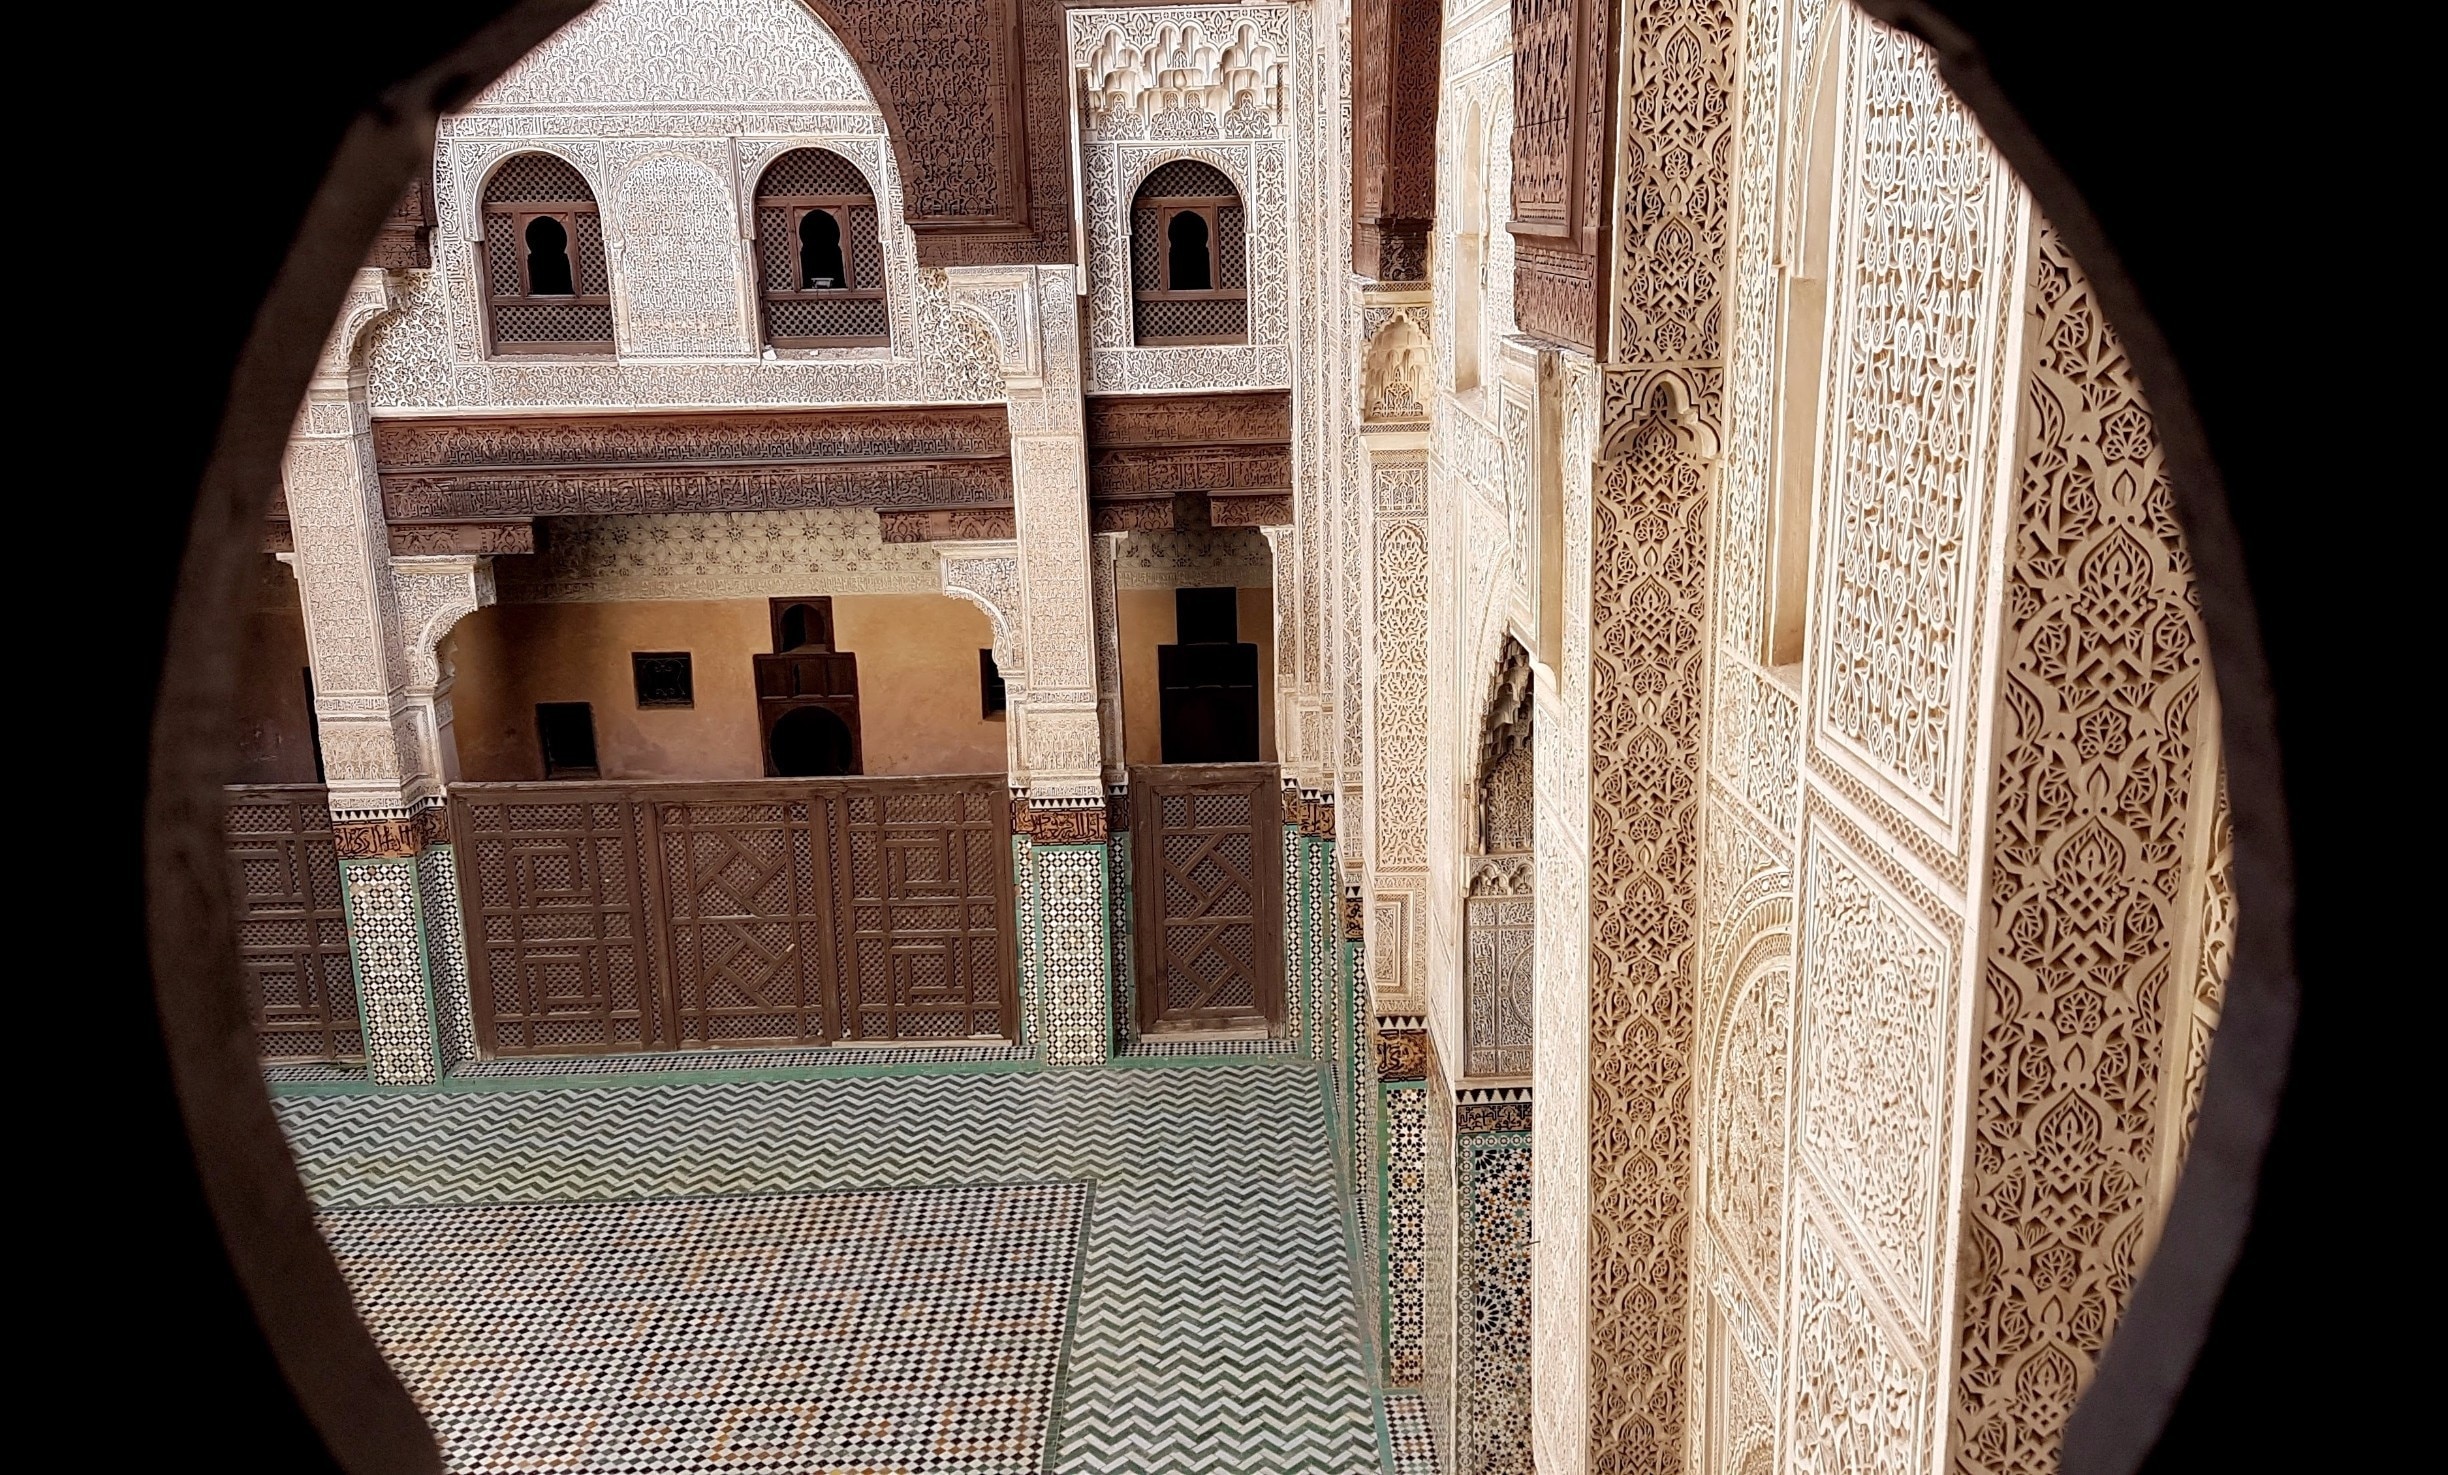 An old madrasa in the center of the medina, with a courtyard full of detailed carvings, beautiful mosaics and great views from the rooftop.

#meknes #morocco